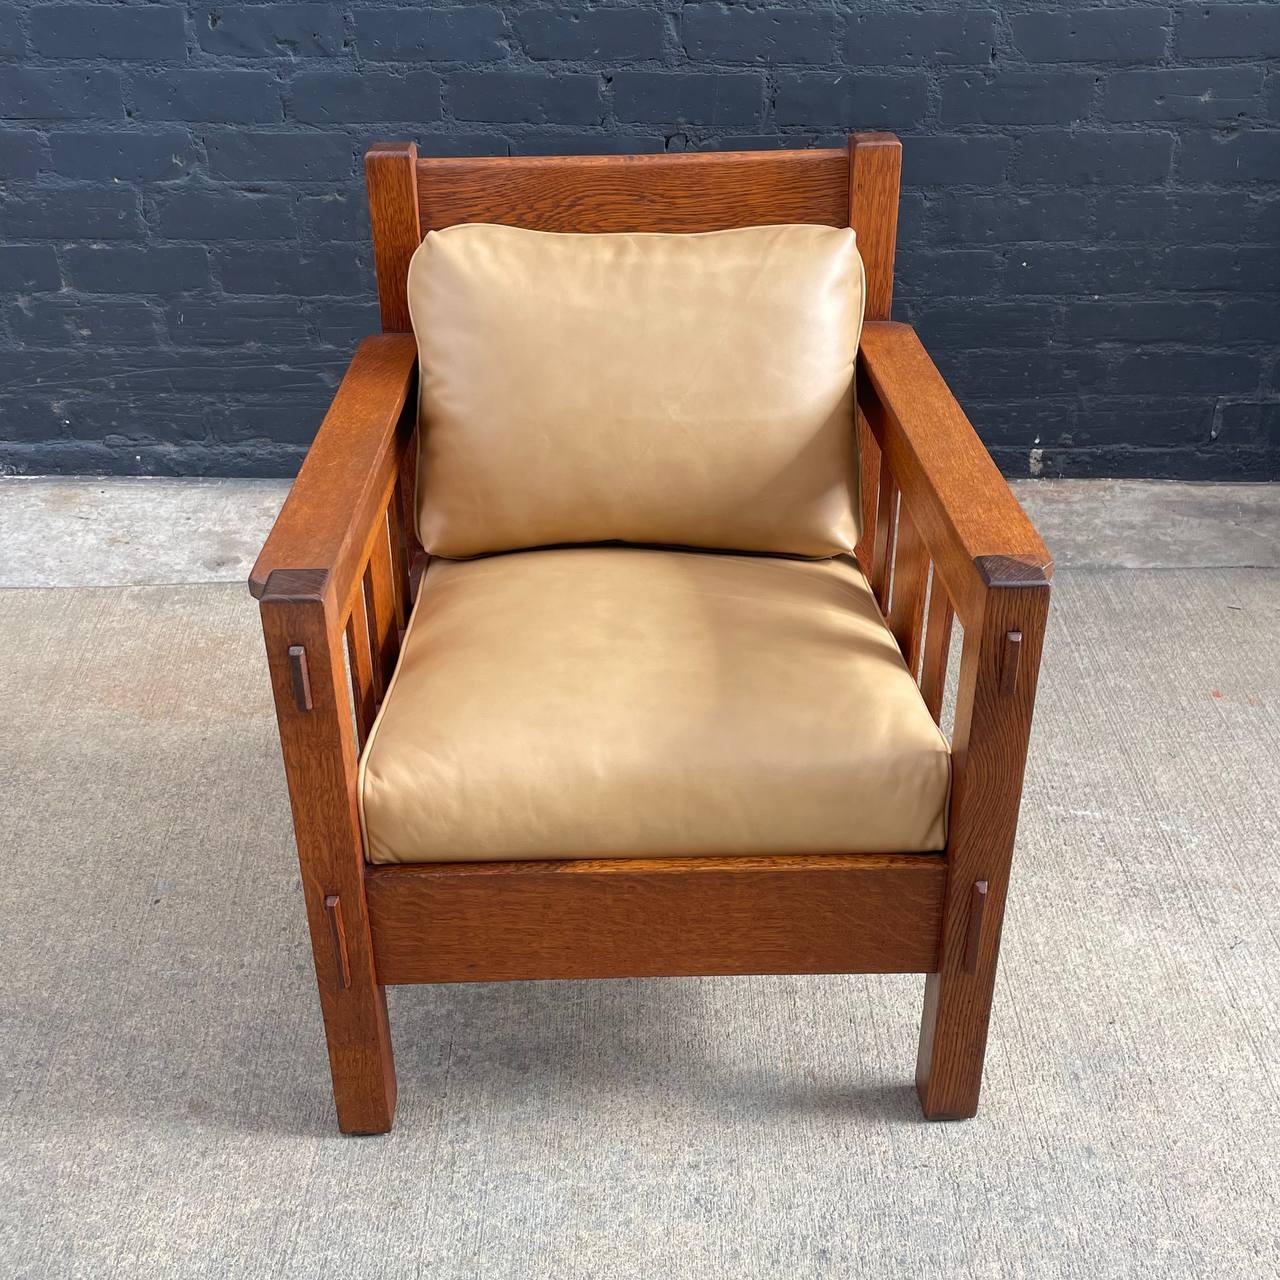 American 1920s Arts & Crafts Mission Oak & Leather Lounge Chair by Stickley  For Sale